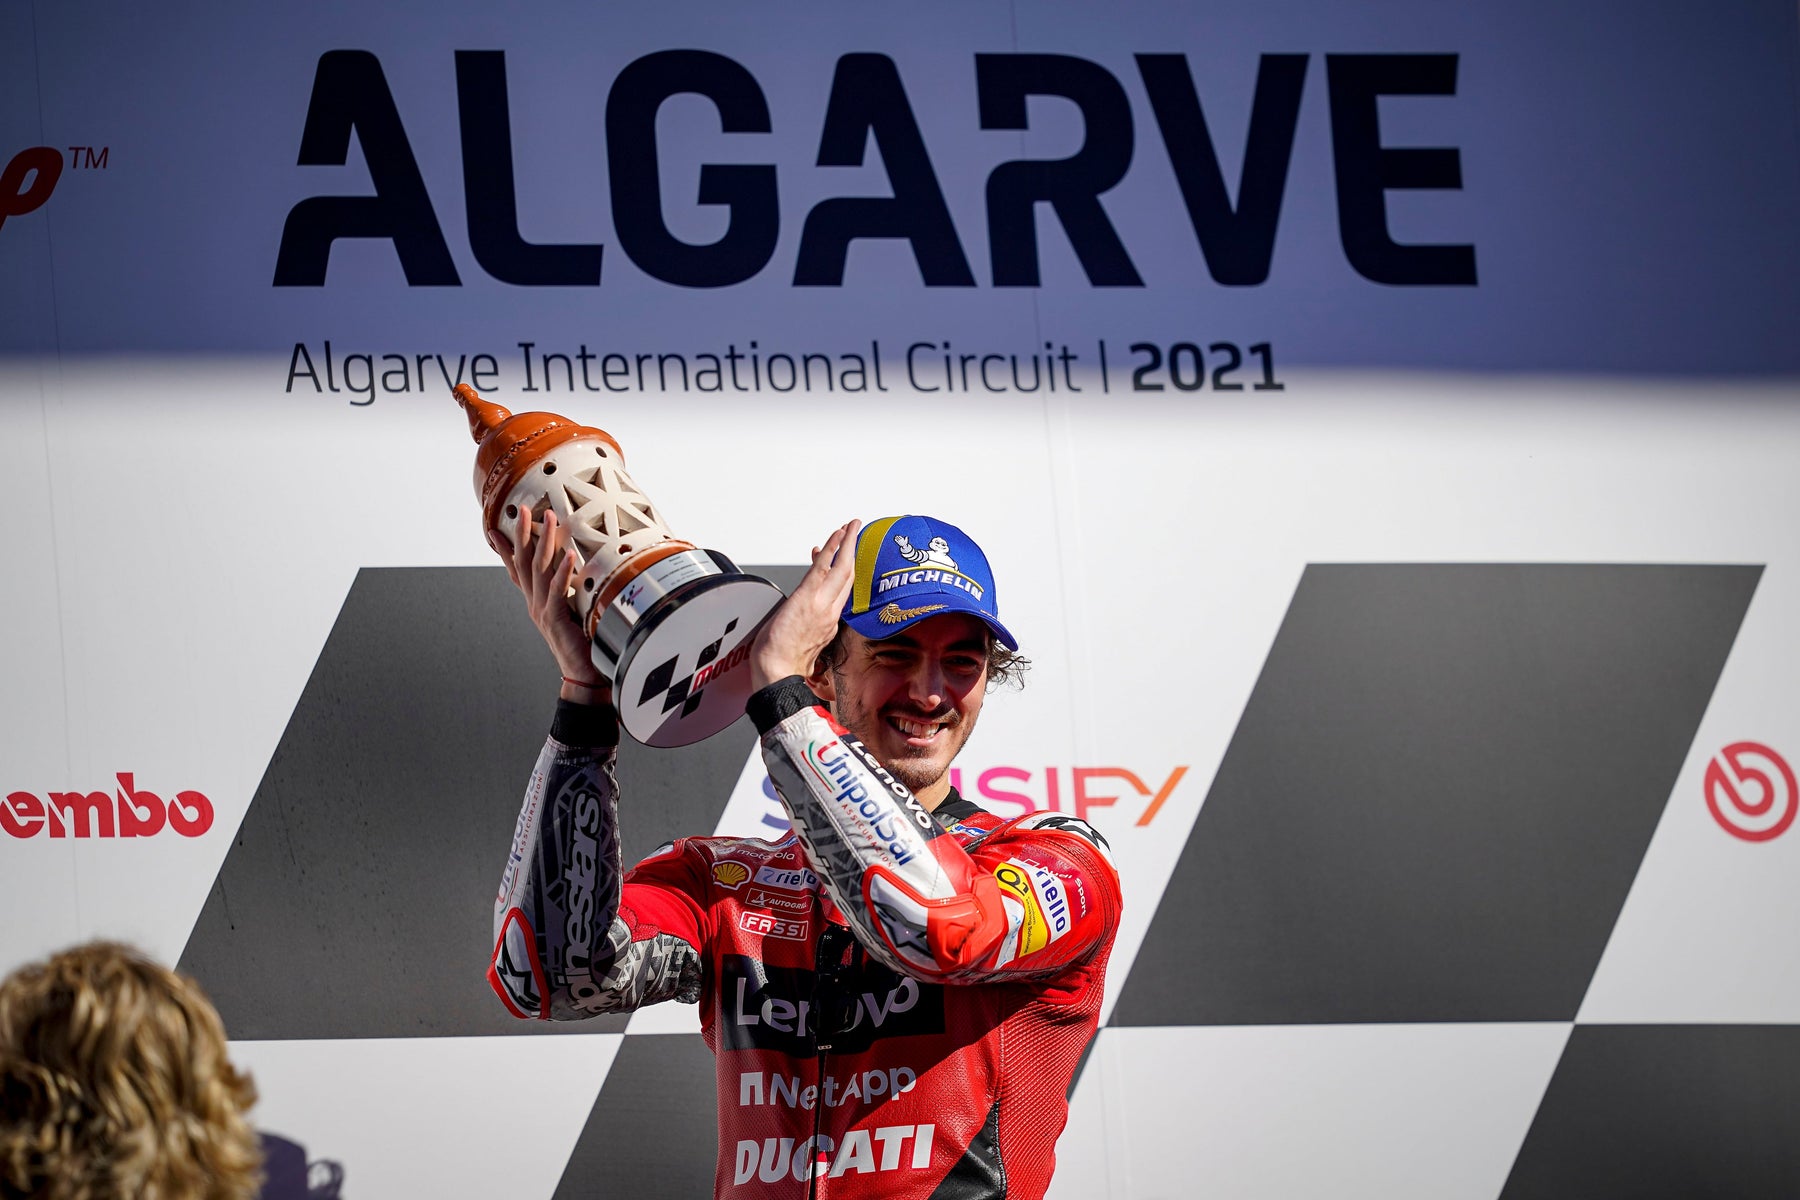 PEERLESS PECCO BAGNAIA TRIUMPHS AT PORTIMAO WITH DOMINANT MOTOGP DISPLAY IN PORTUGAL